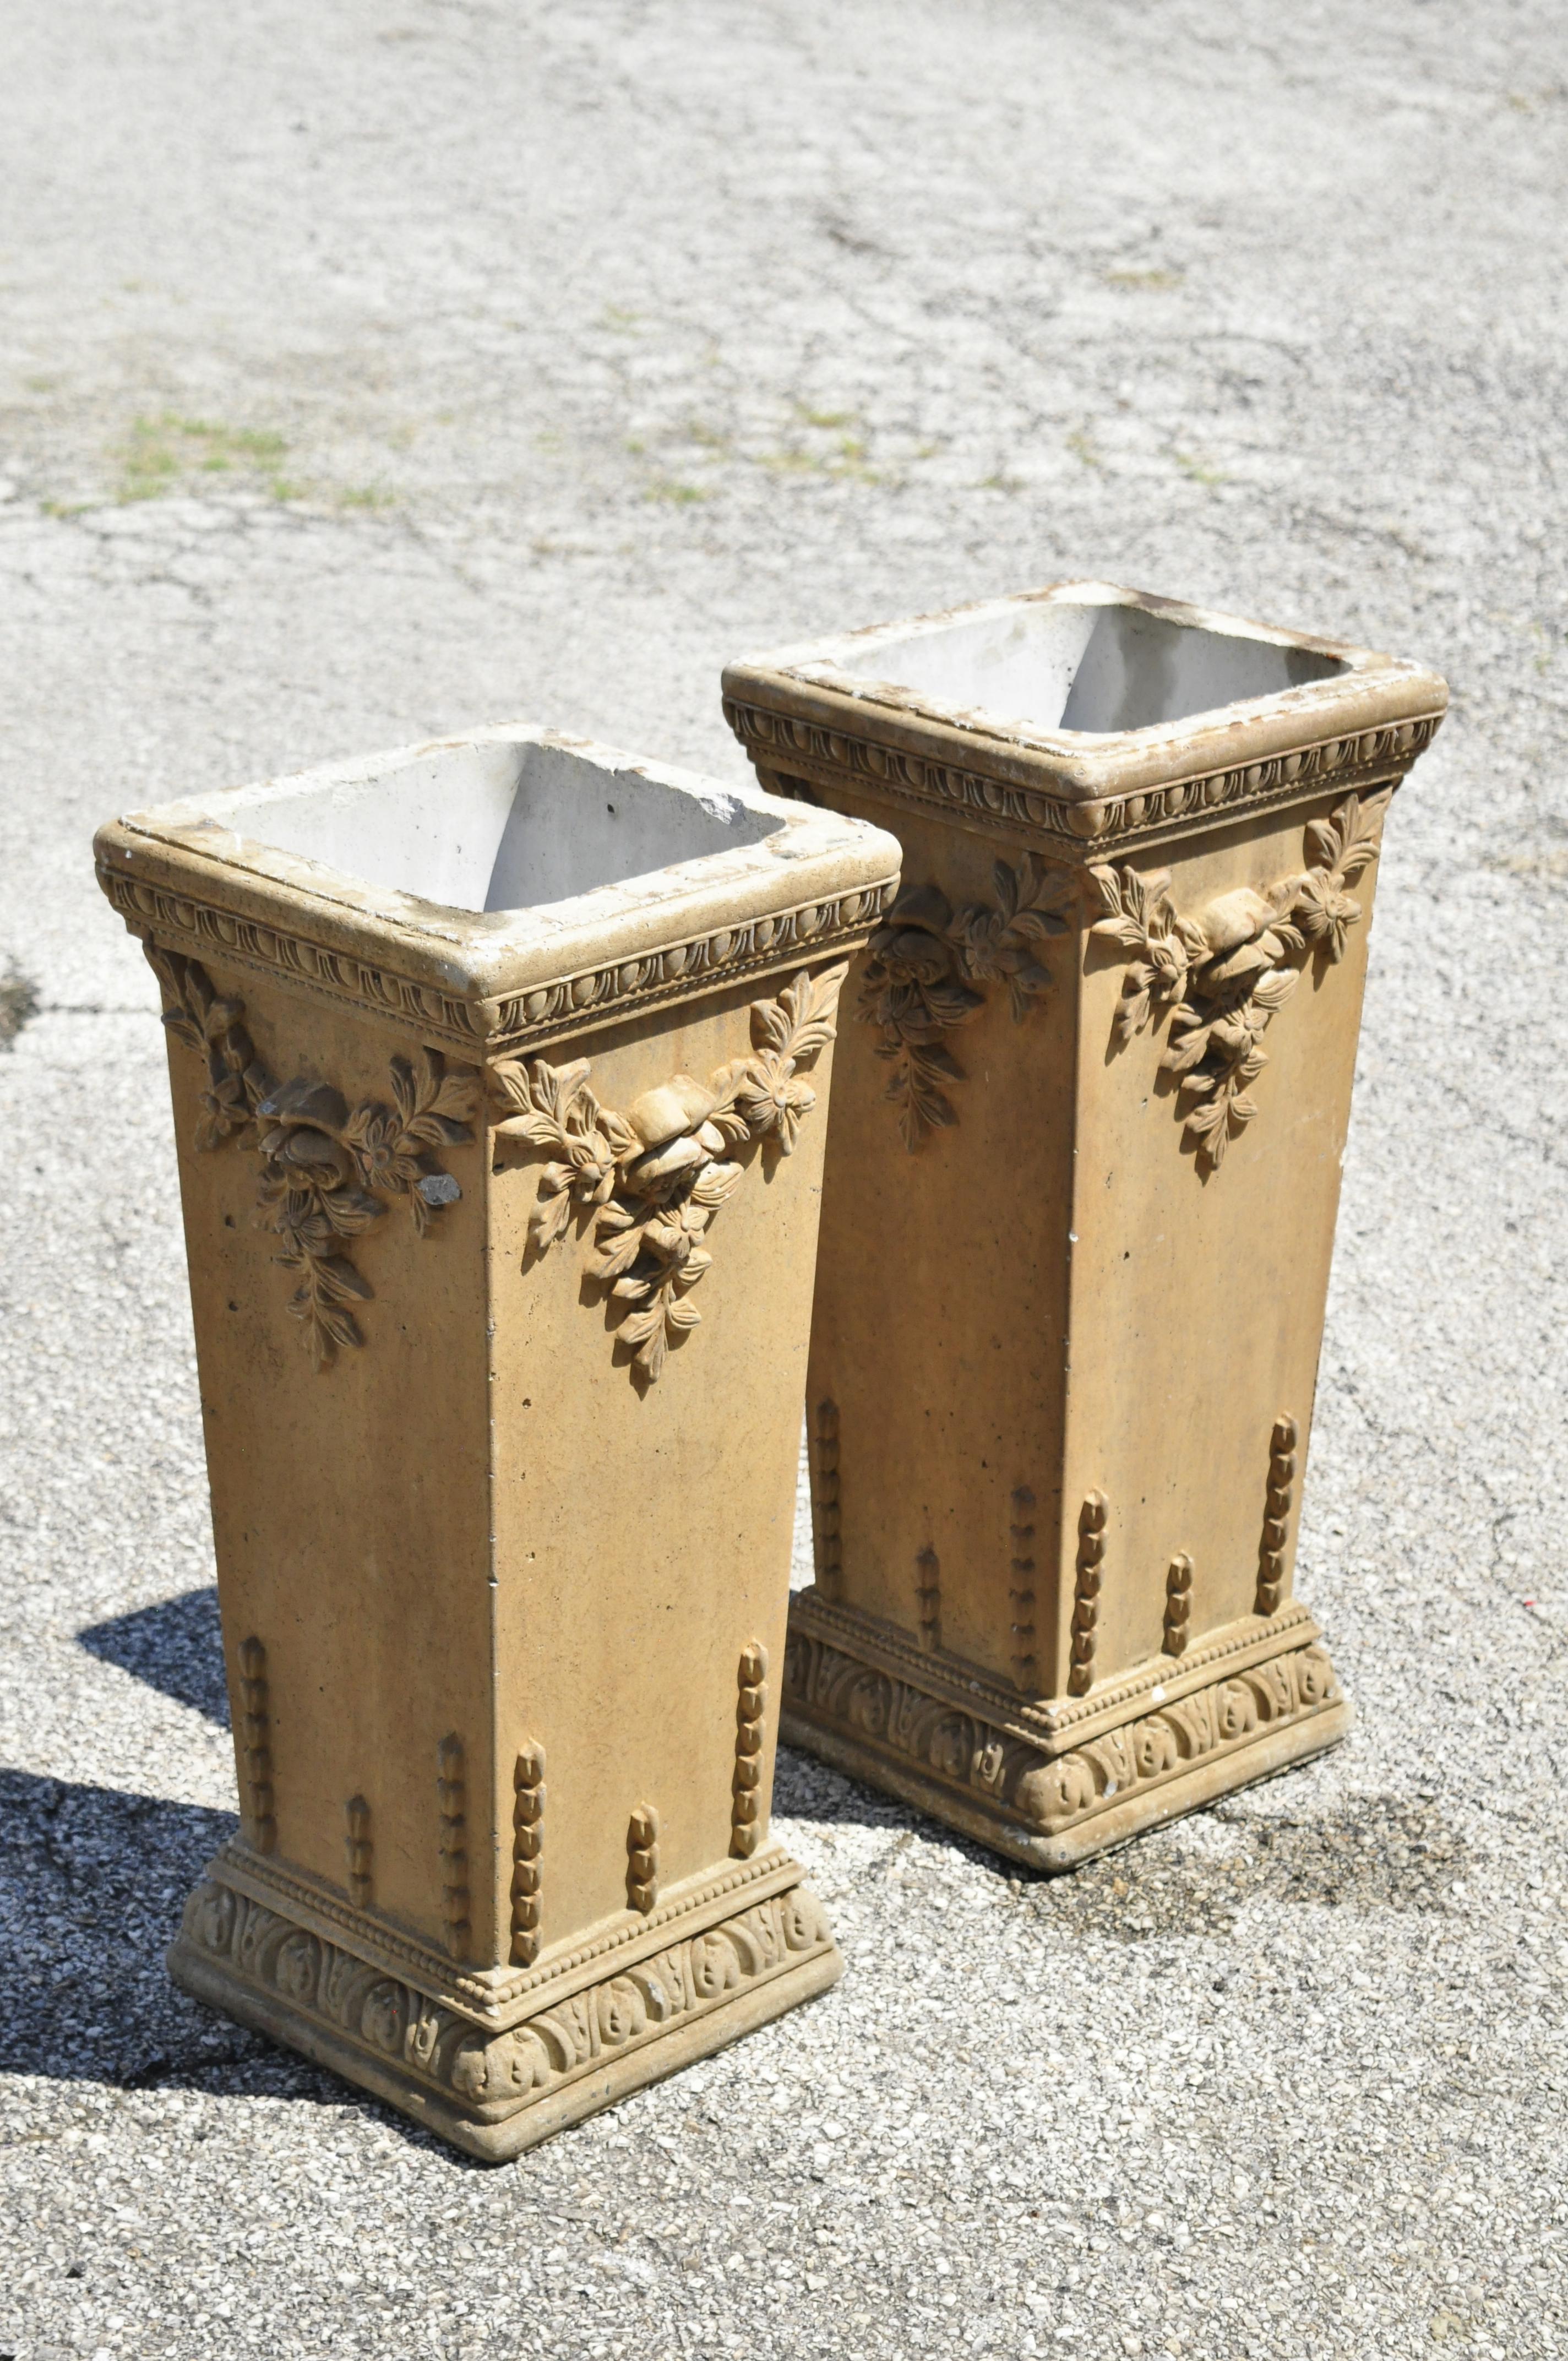 Vintage cement French Victorian tall floral pedestal planter pot stands, a pair. Item features cast cement construction, flower drapes, ornate details, very nice vintage pair, great style and form. Can be used as pedestals or flipped around and used